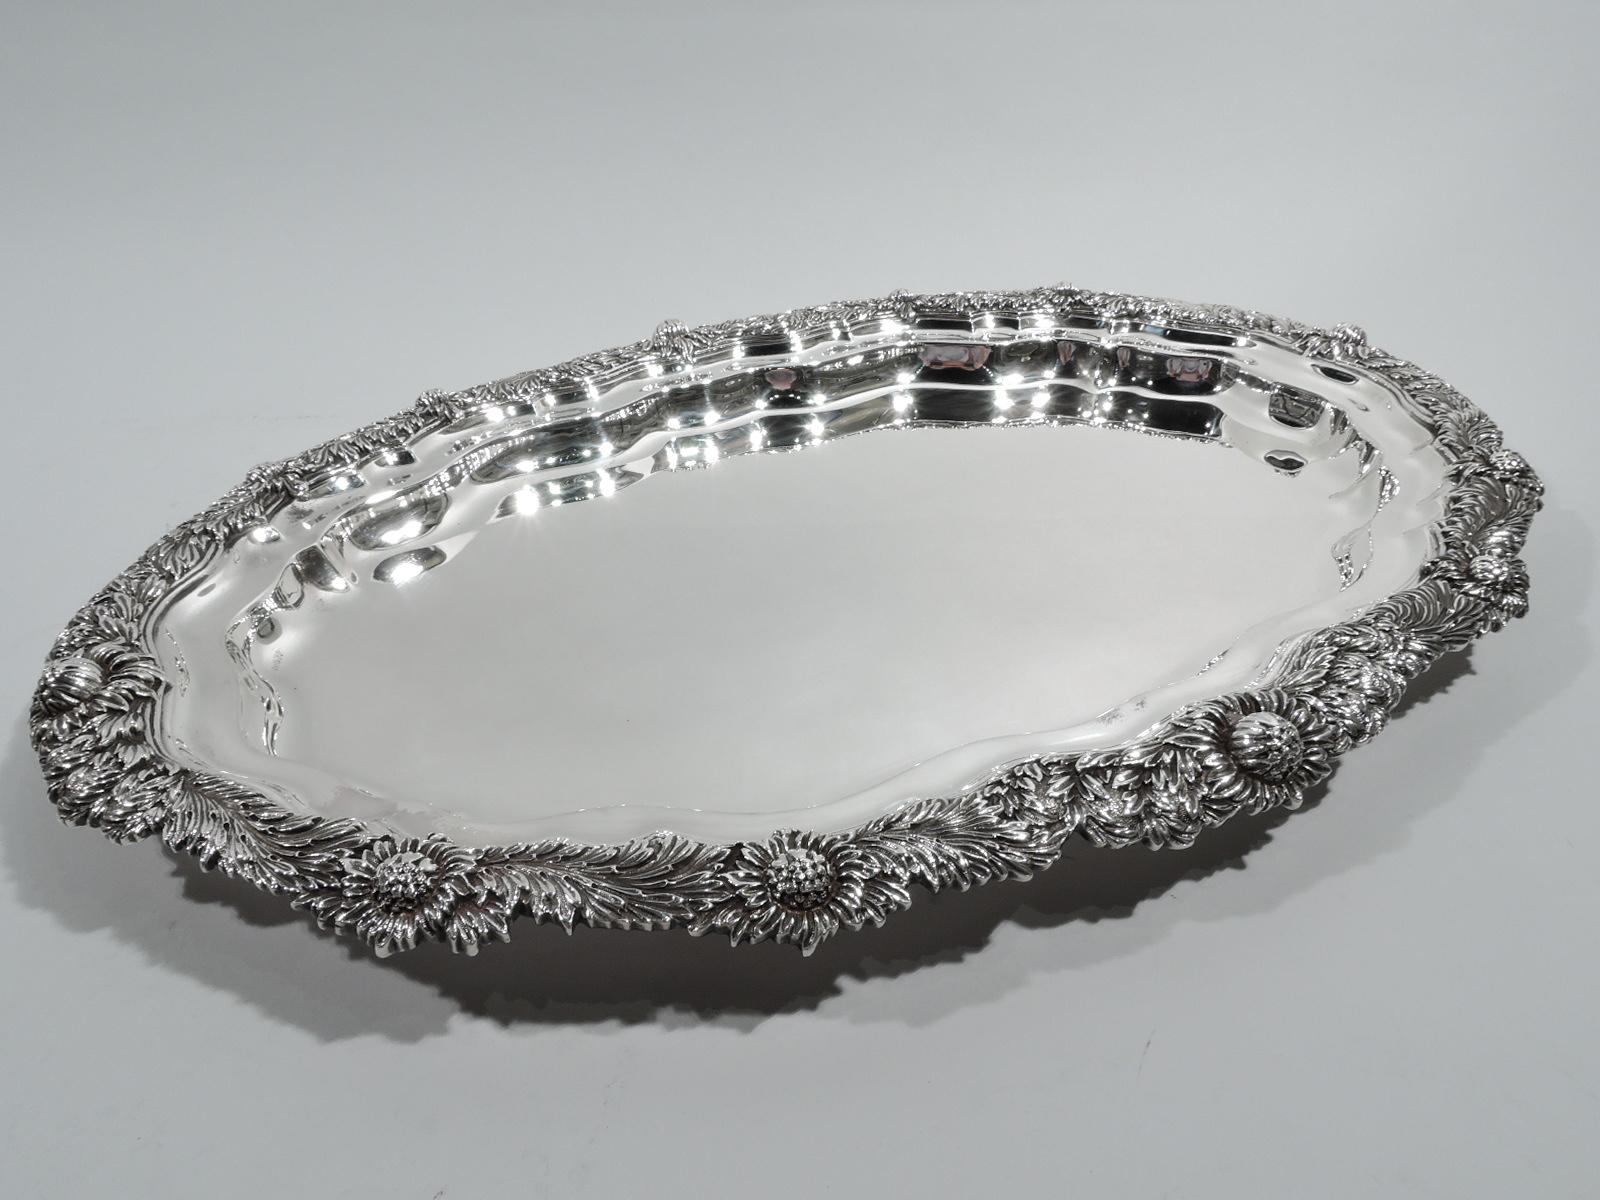 American Chrysanthemum sterling silver tray, ca 1910. Scroll-shaped oval well and irregular rim comprising dense and overlapping flower heads and foliage. A gorgeous piece in the historic pattern. Marked “Sterling” and “20 IN”. Tiffany quality but